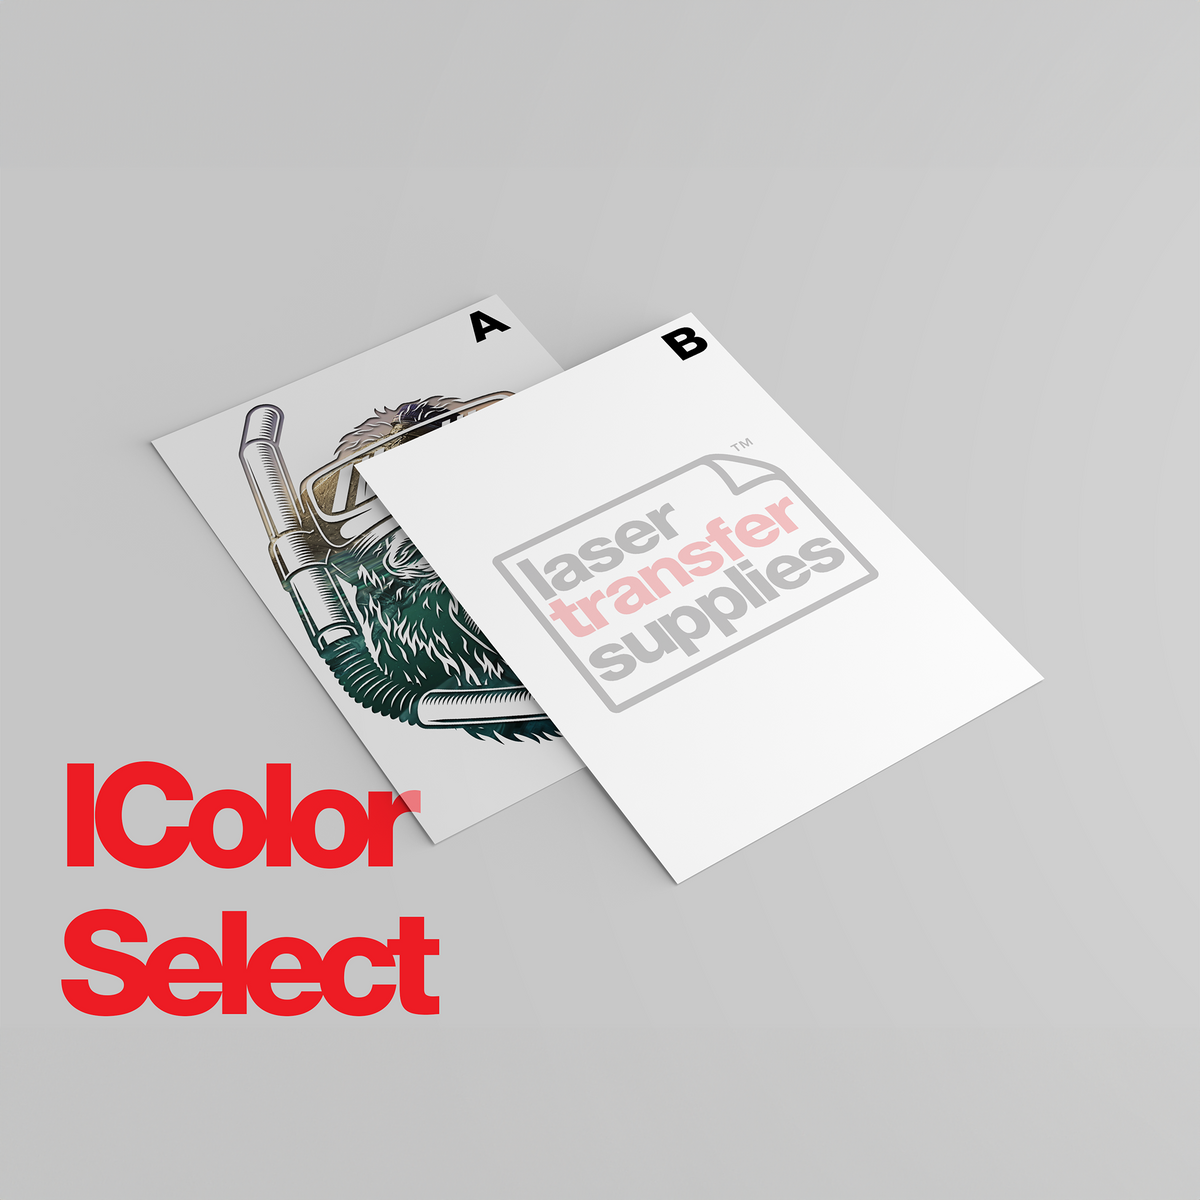 IColor Select